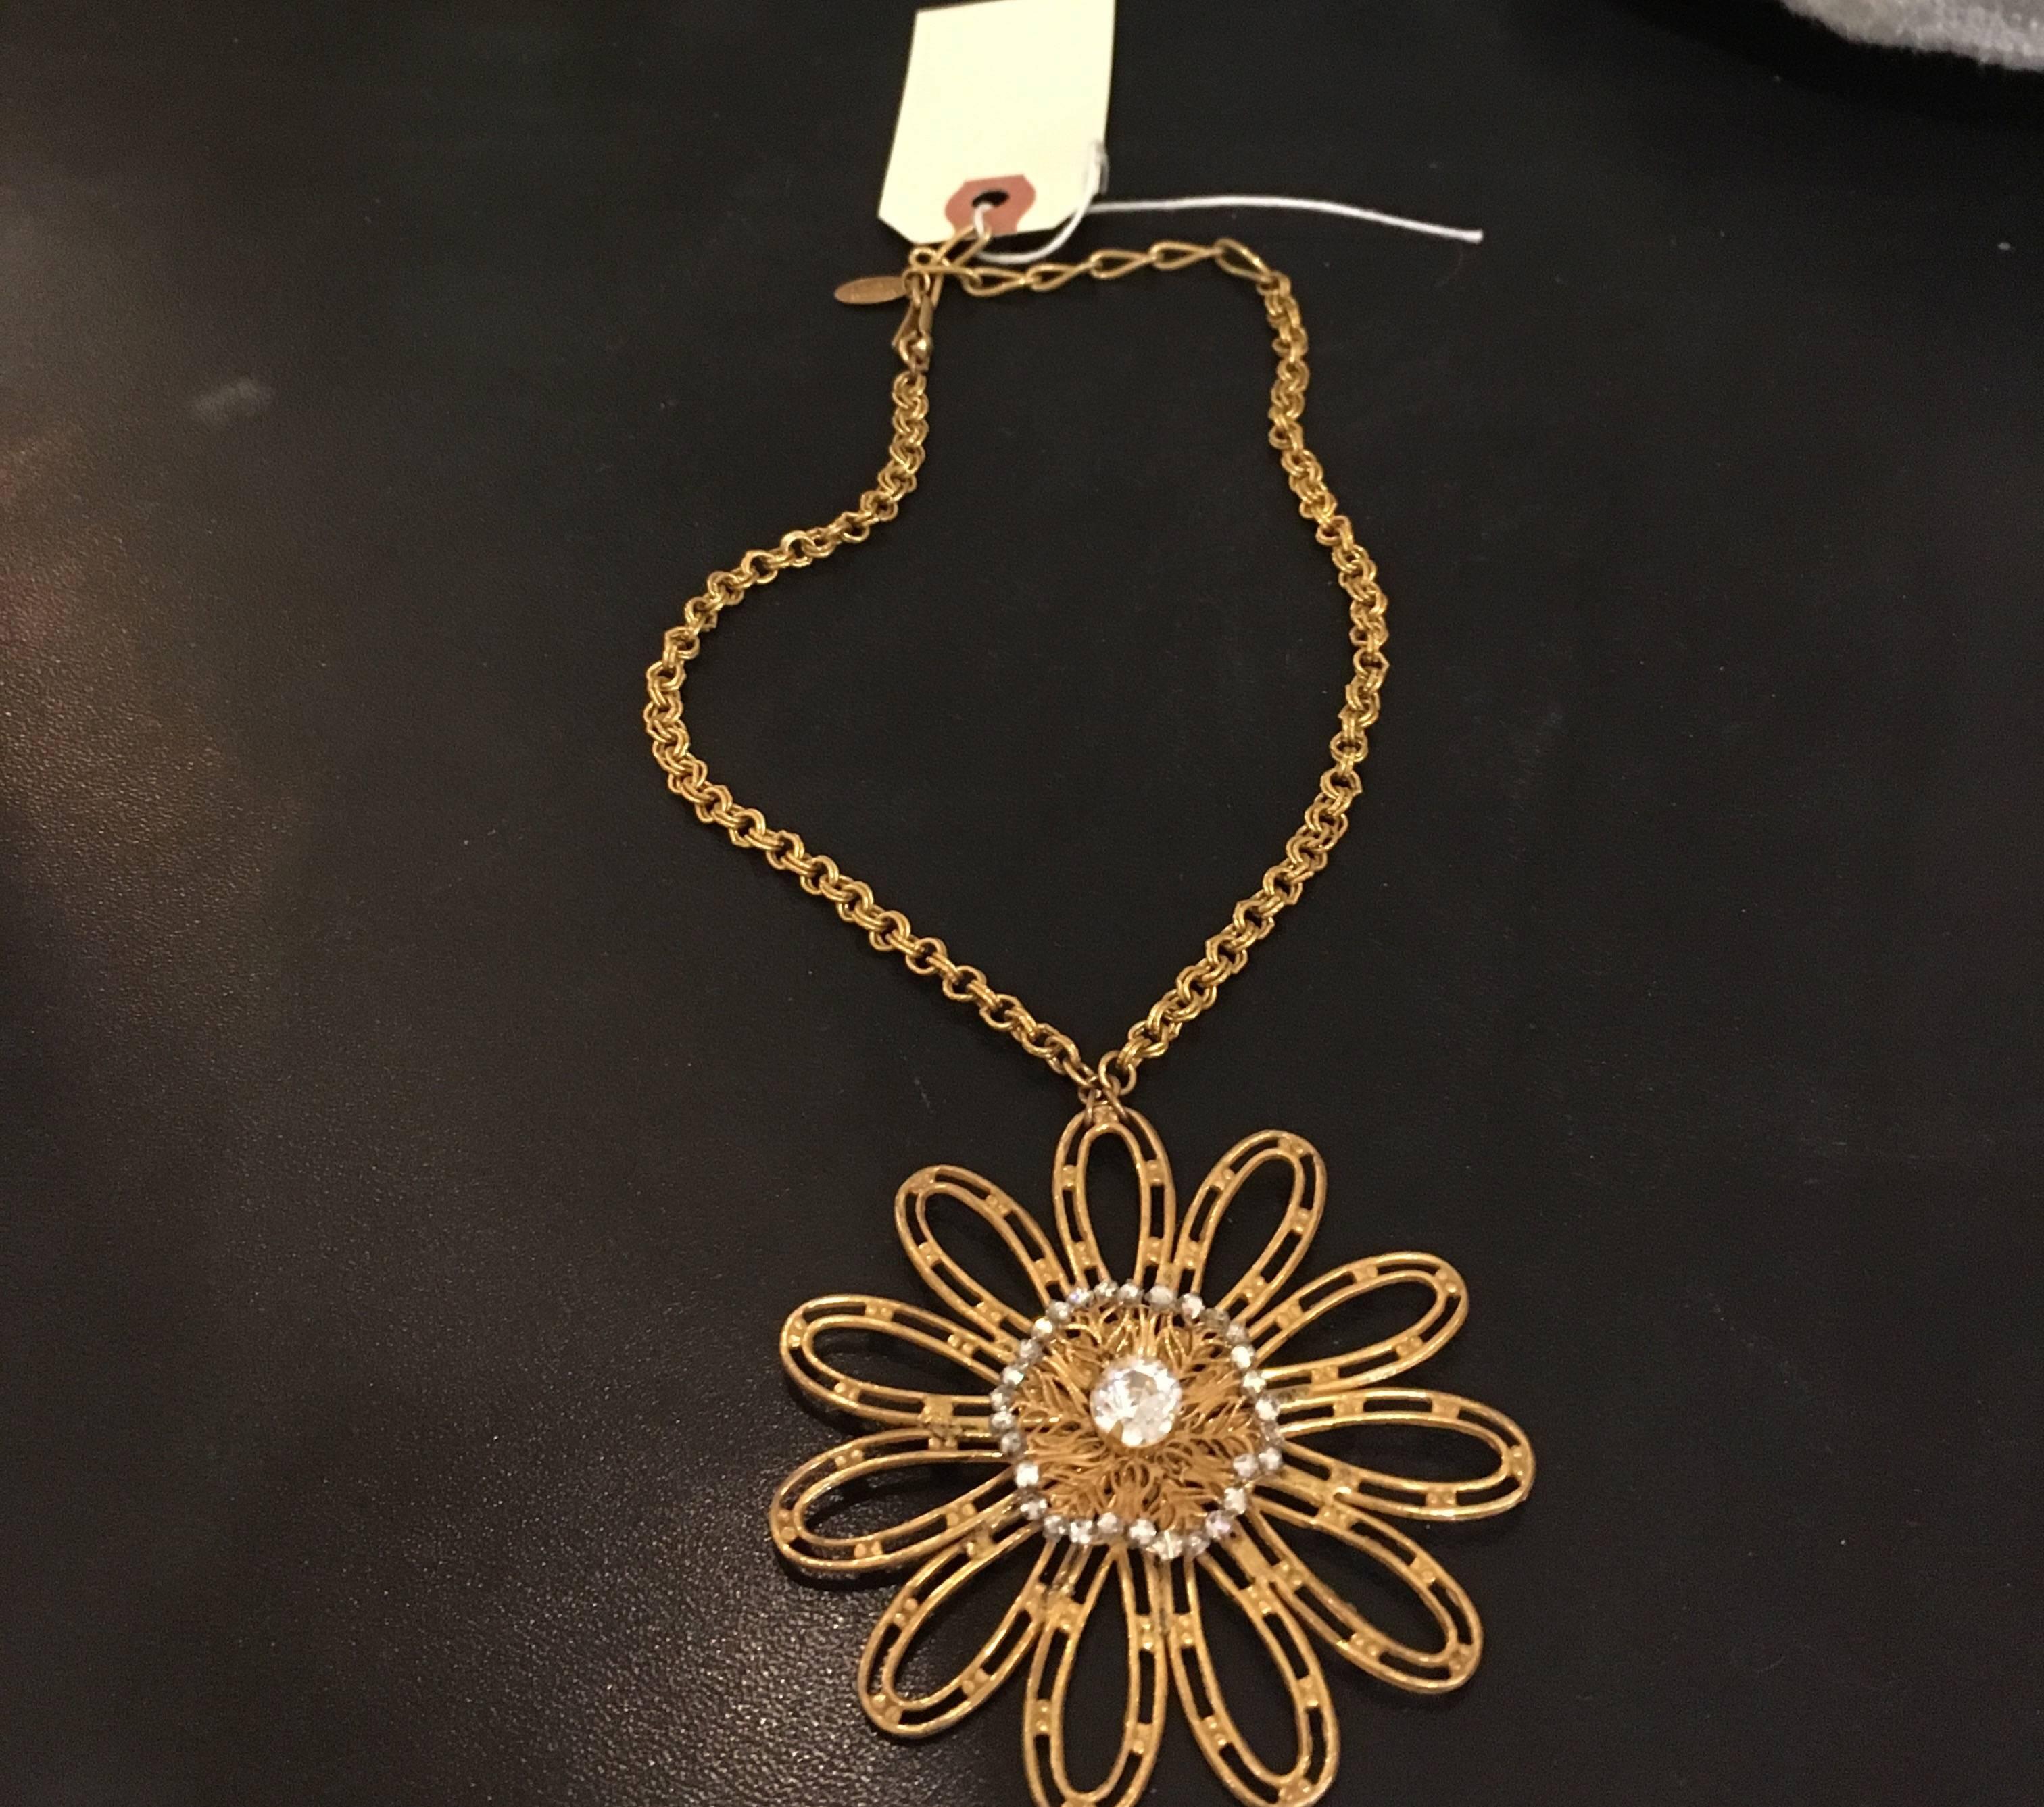 Large gold tone flower with filigree center ringed in clear stones on a gold.